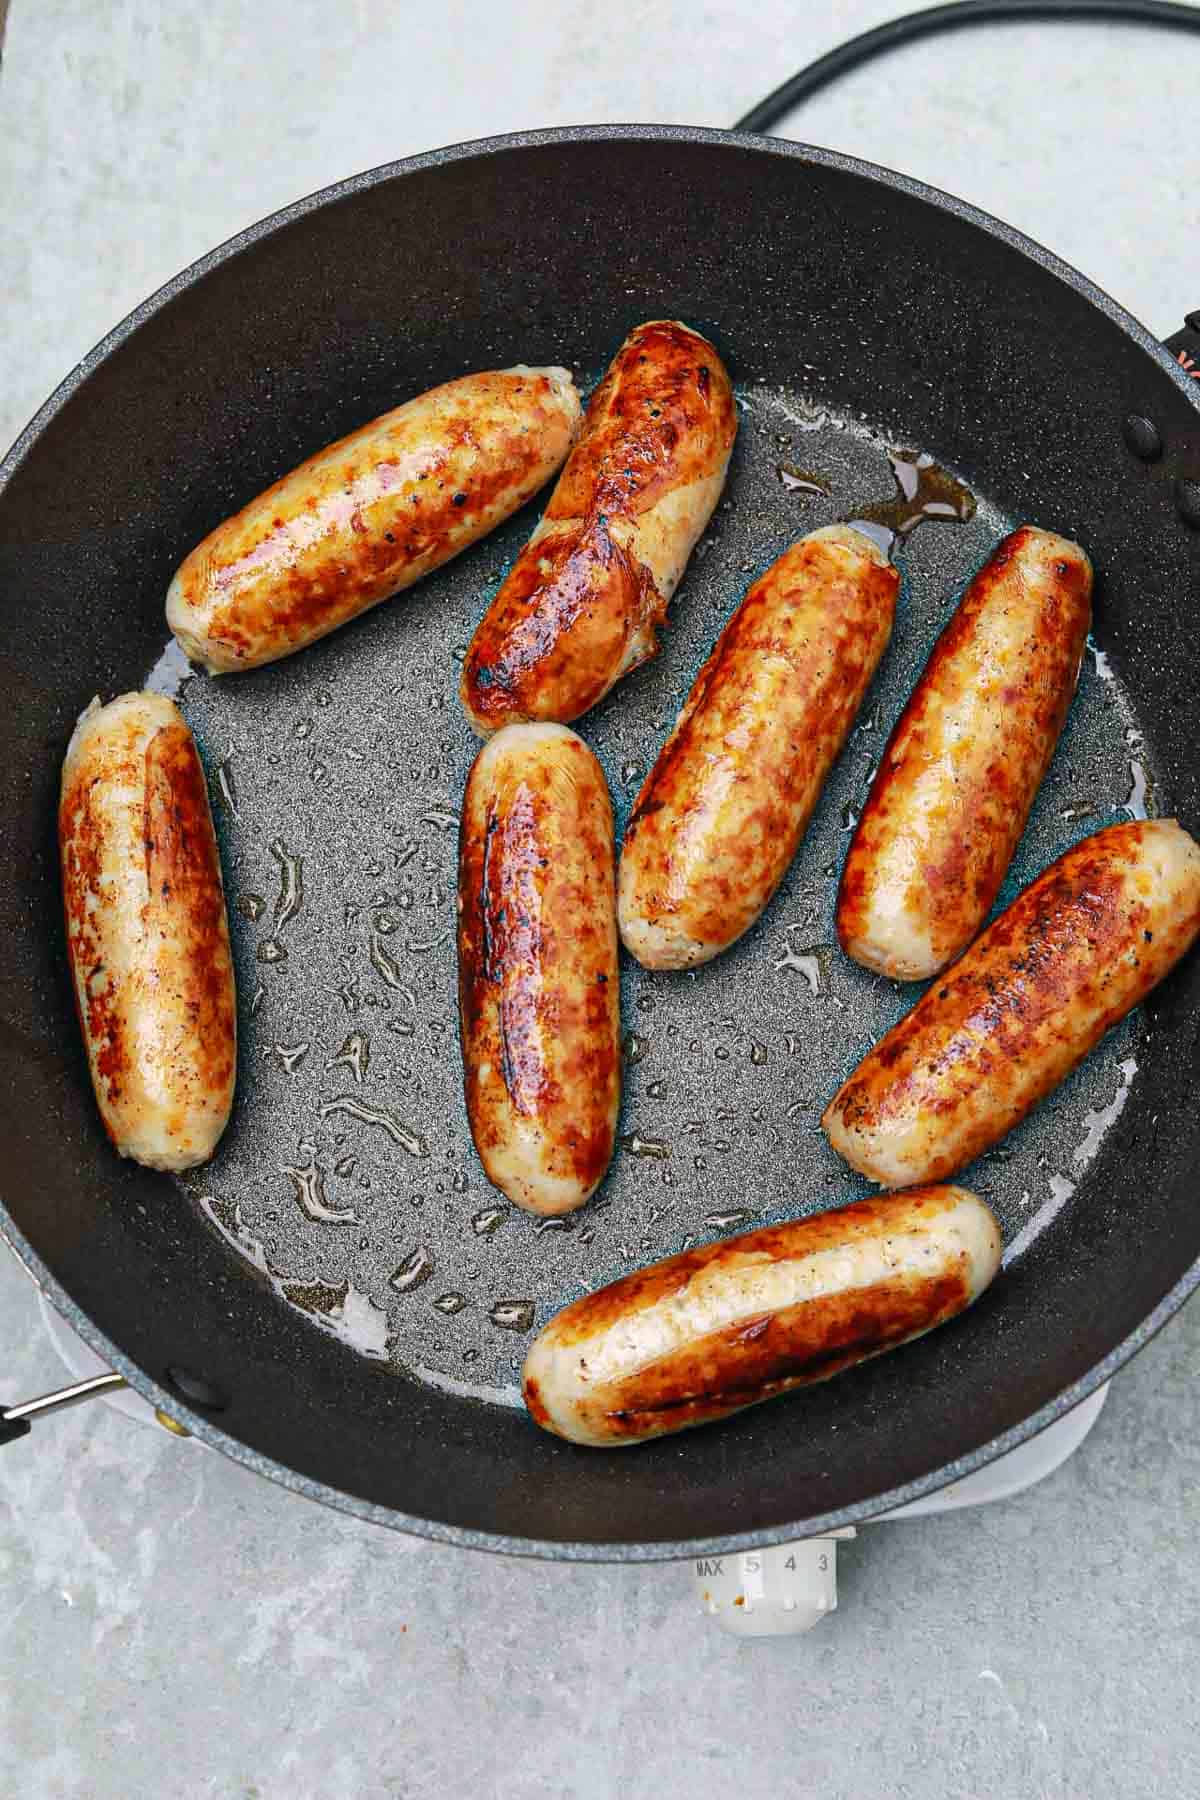 cooked sausages in a pan.